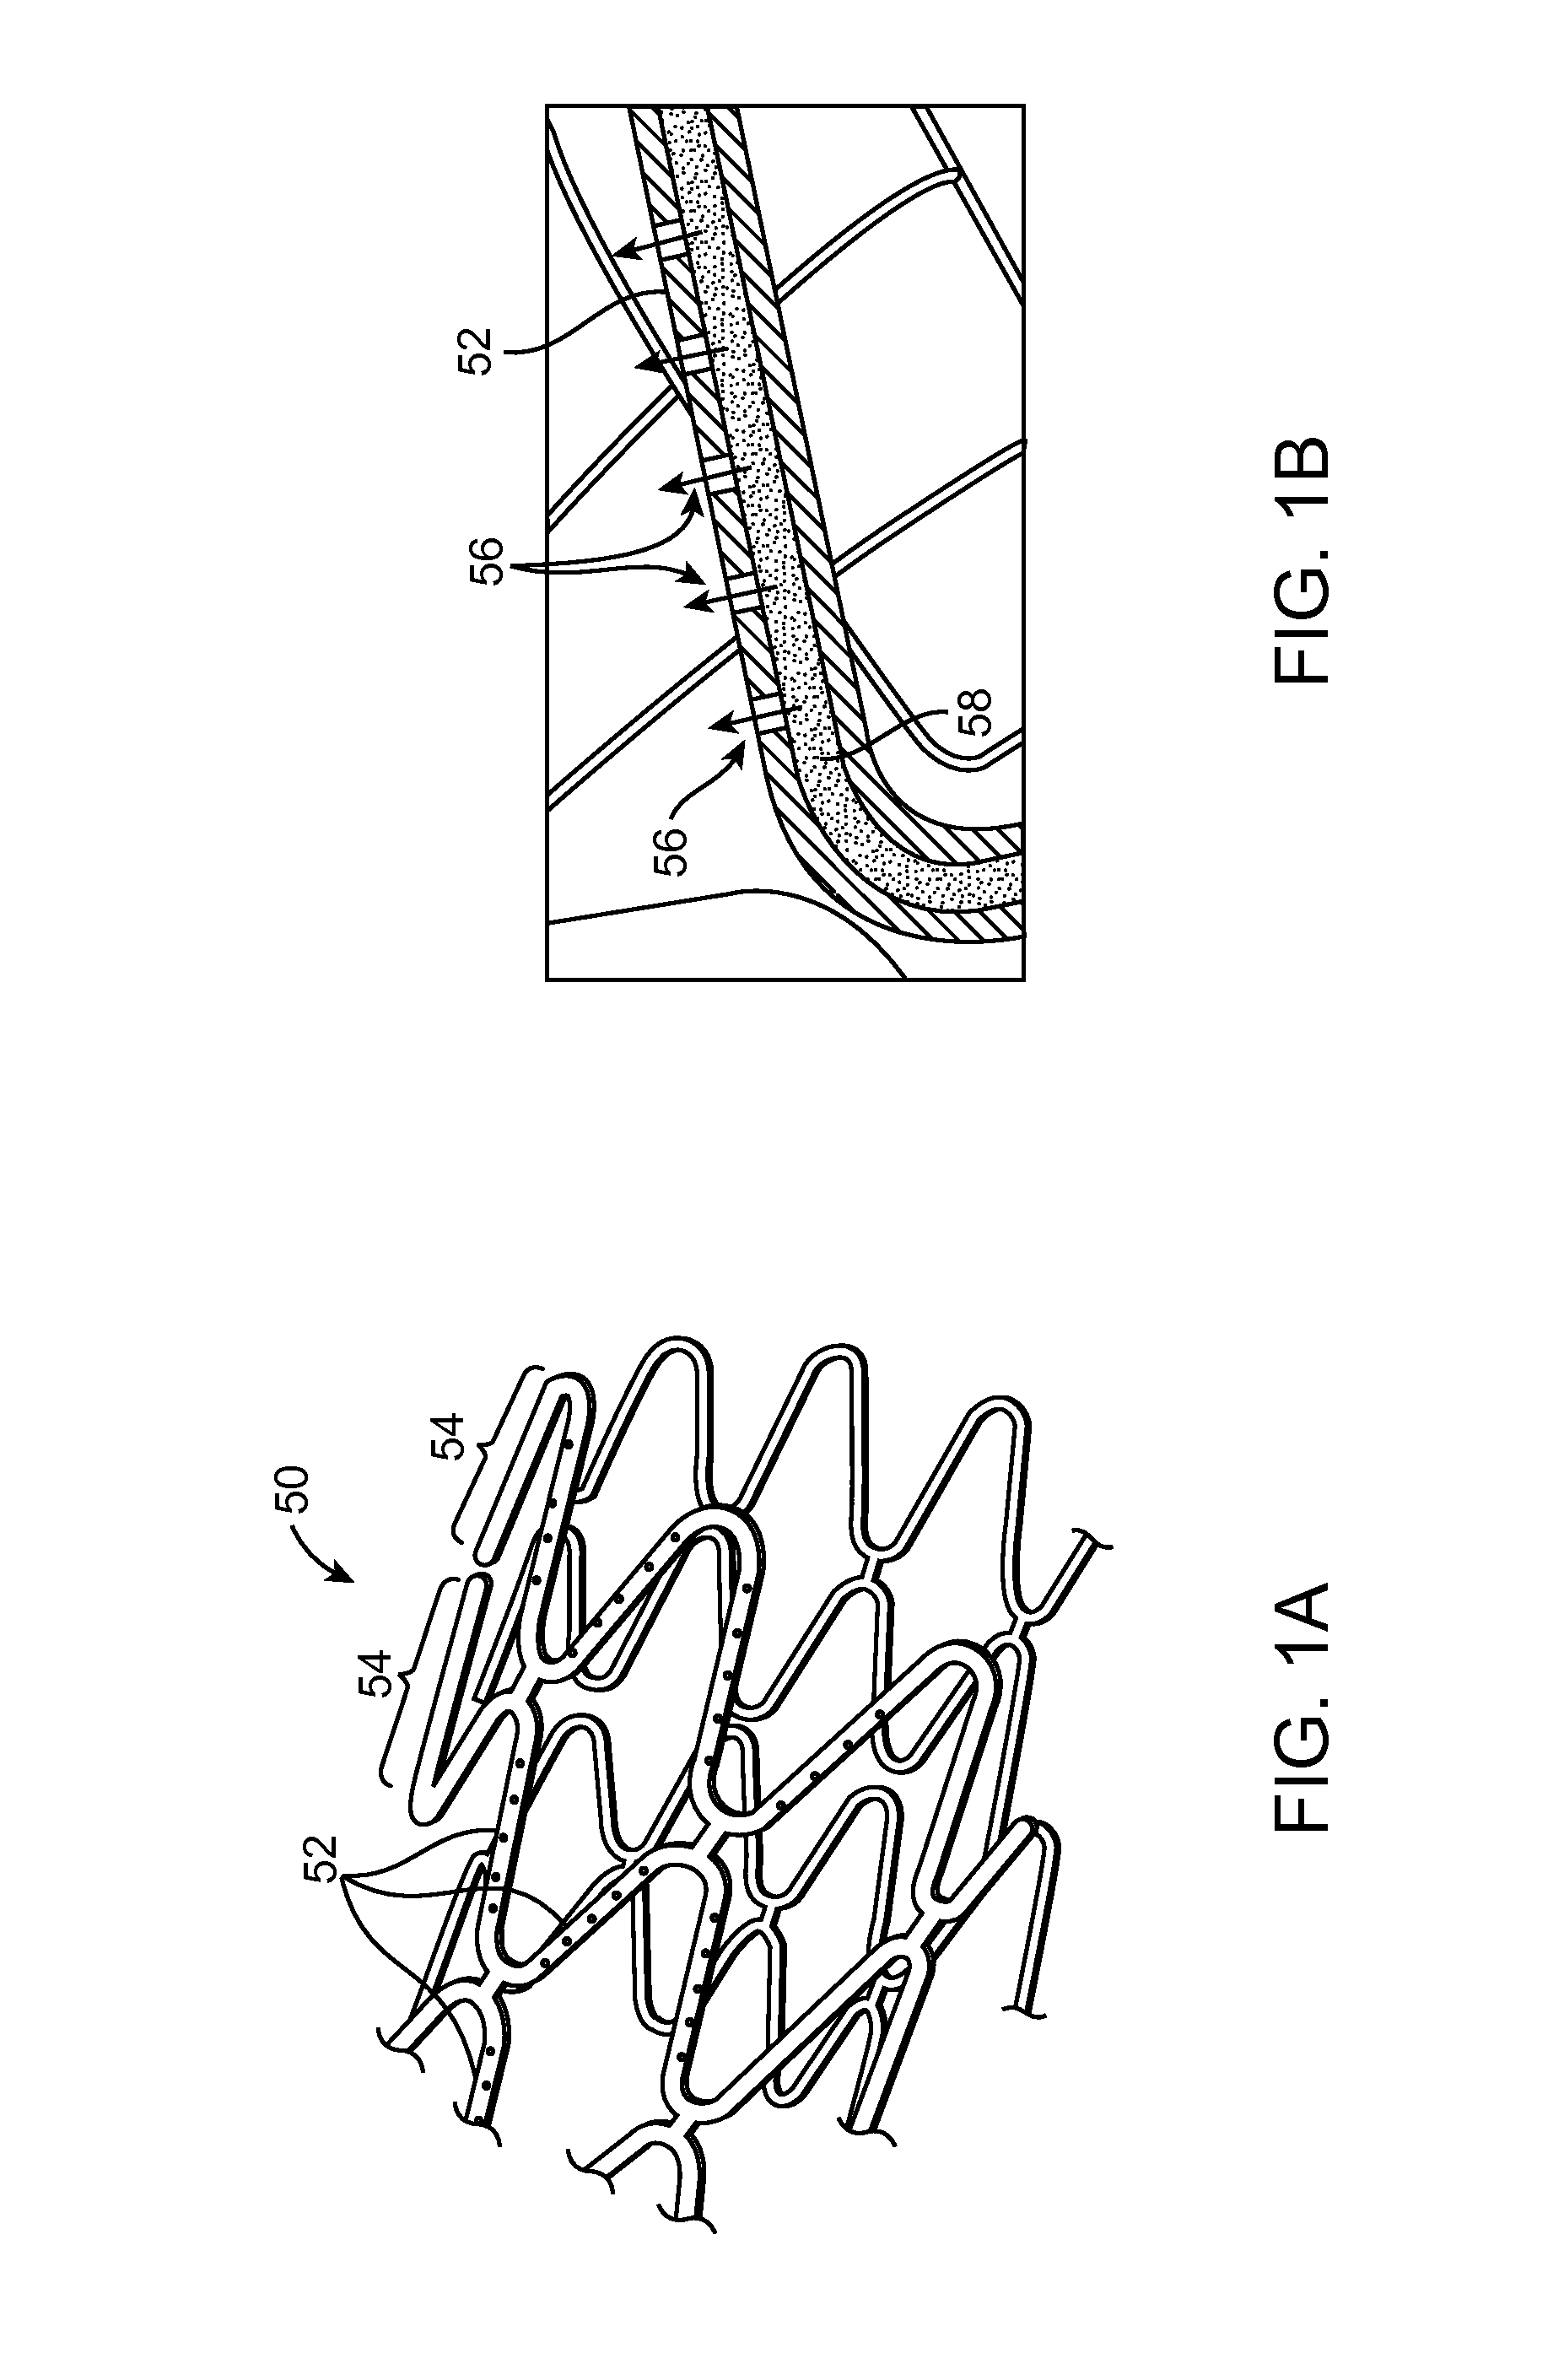 Methods of drug loading a hollow stent with a high viscosity formulation